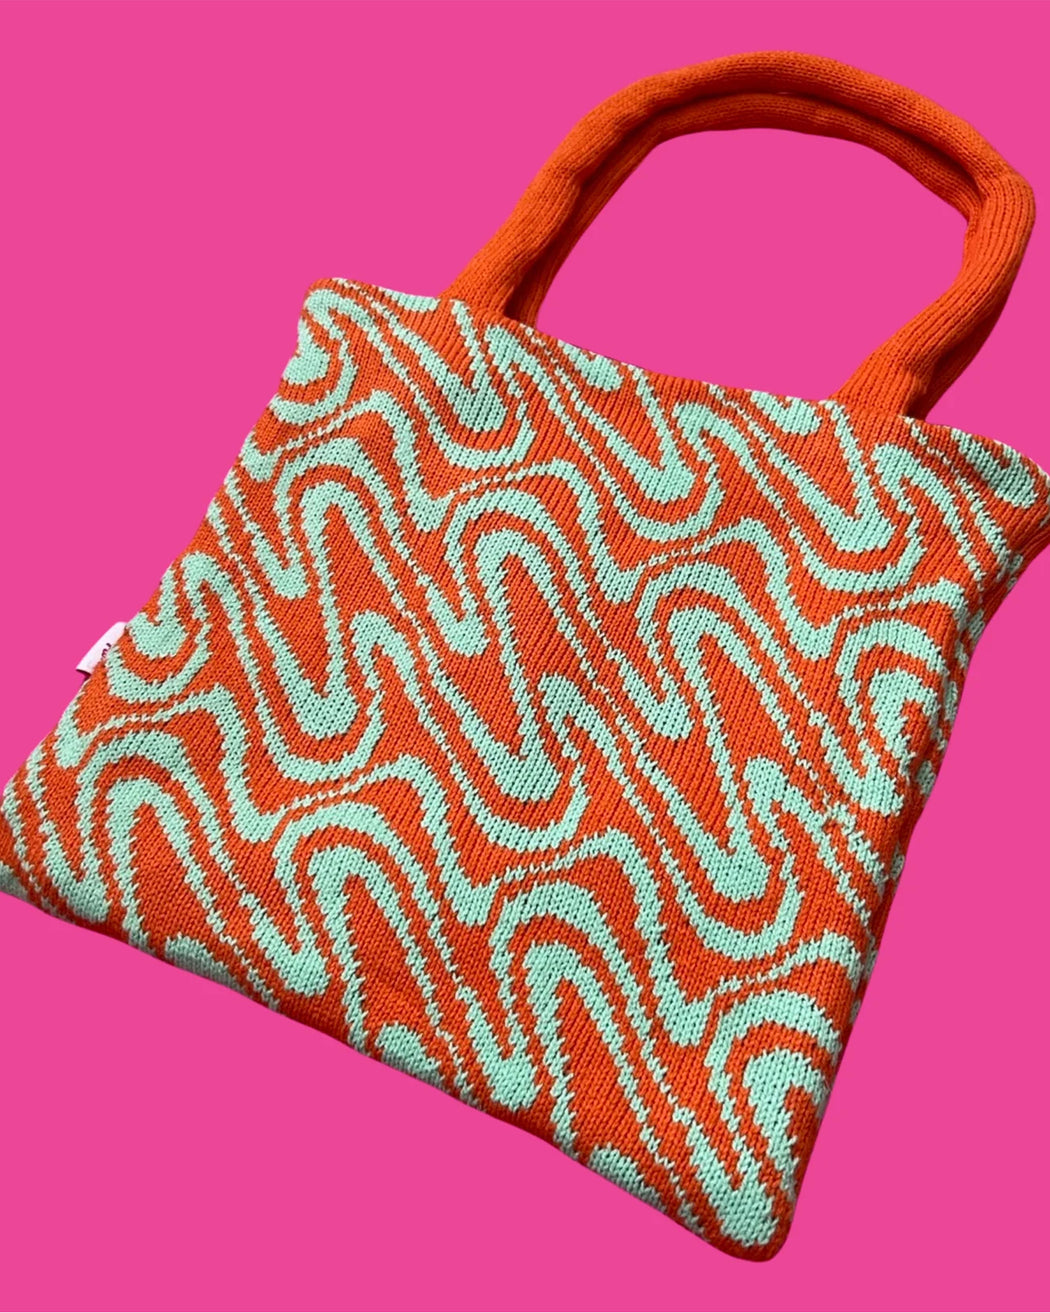 Swirly Tote Bag – Assorted Colors